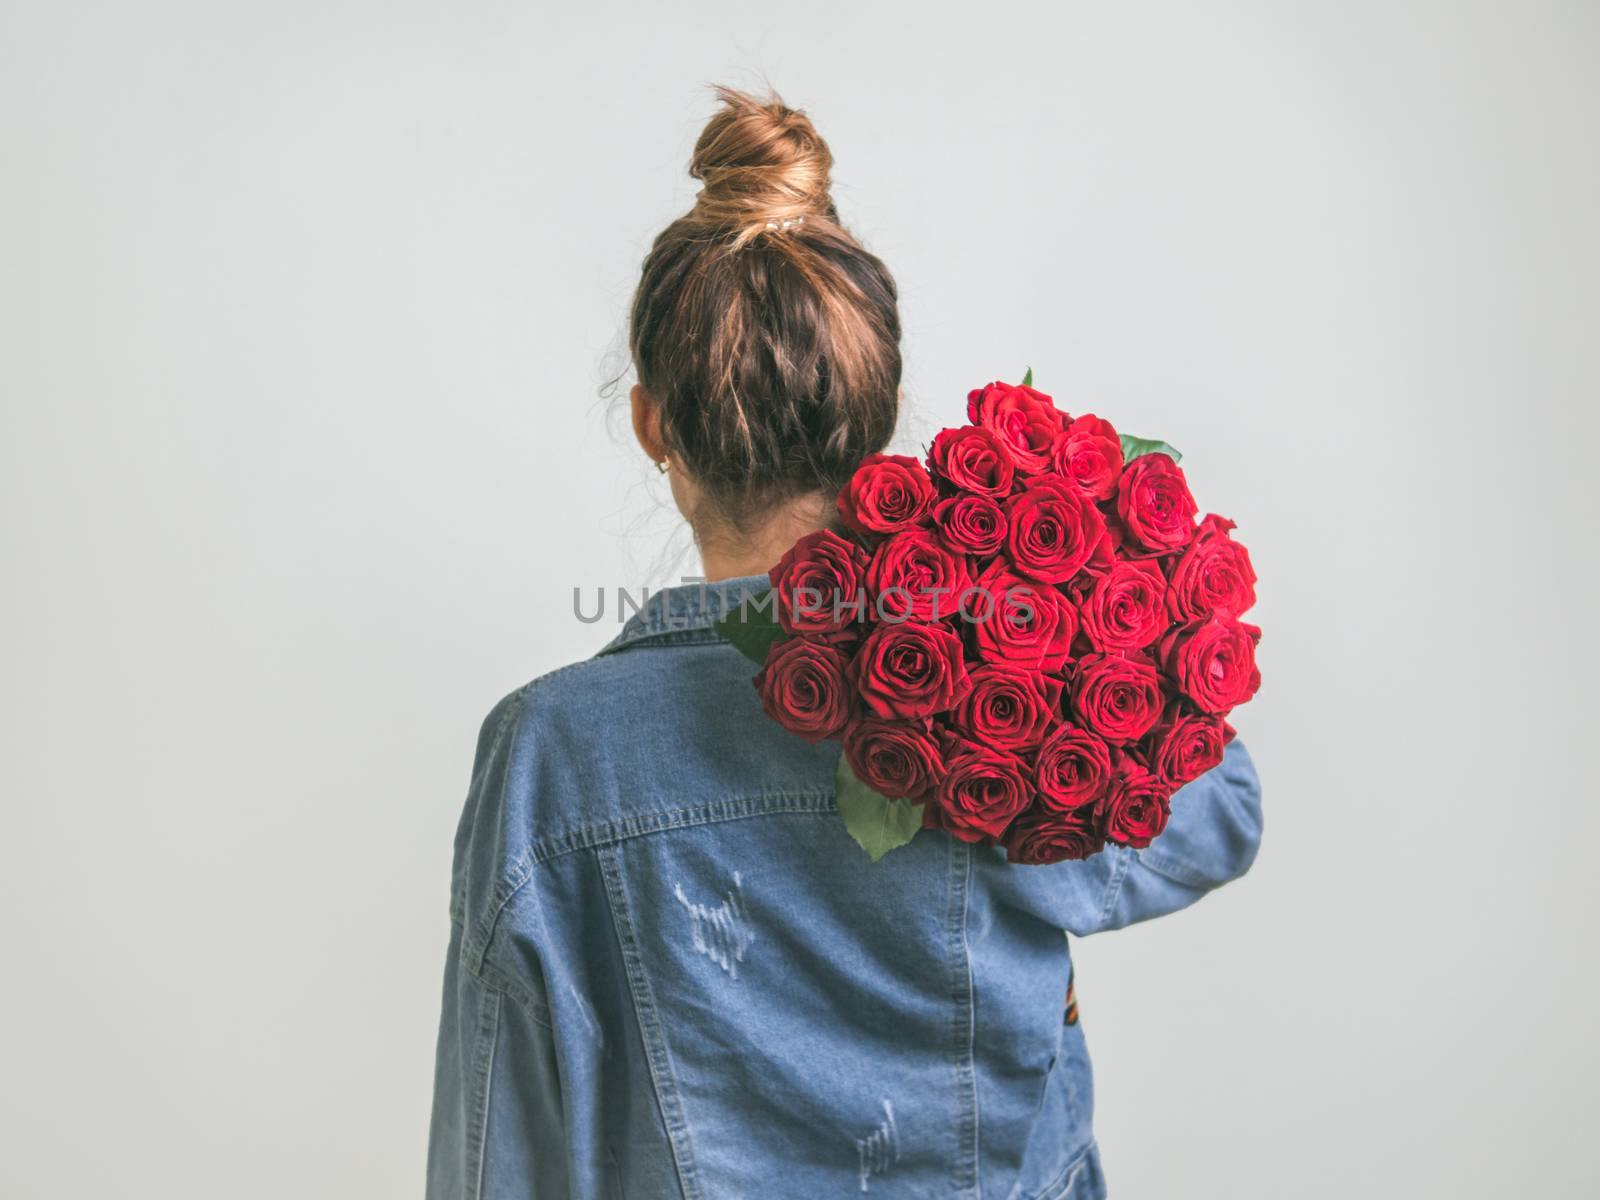 Back view of young woman in denim jacket holding bunch of red roses on shoulder. Girl with bun updo in jeans holding flowers. White background.Copy space. Visual content and idea for social media post